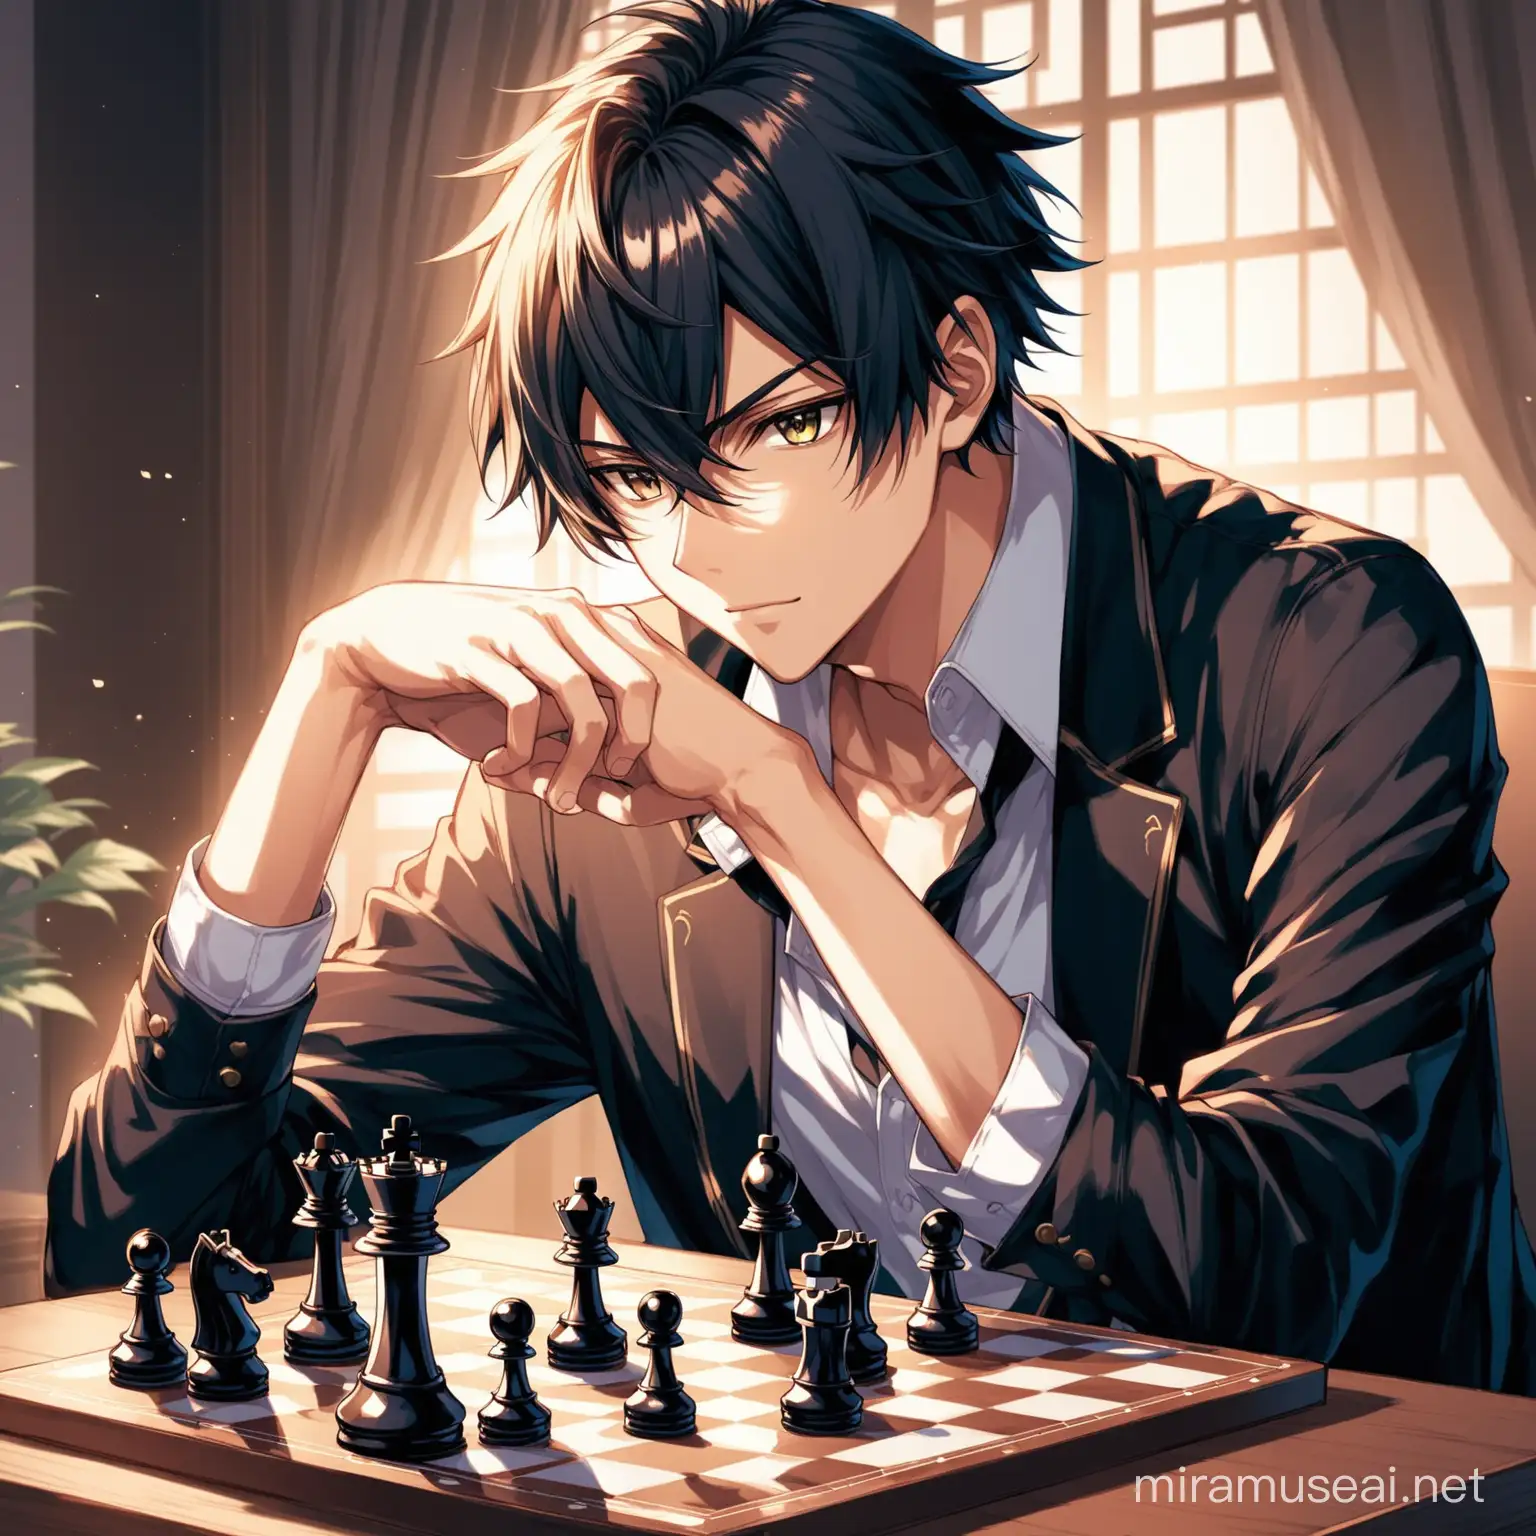 pro anime boy is playing chess cool


